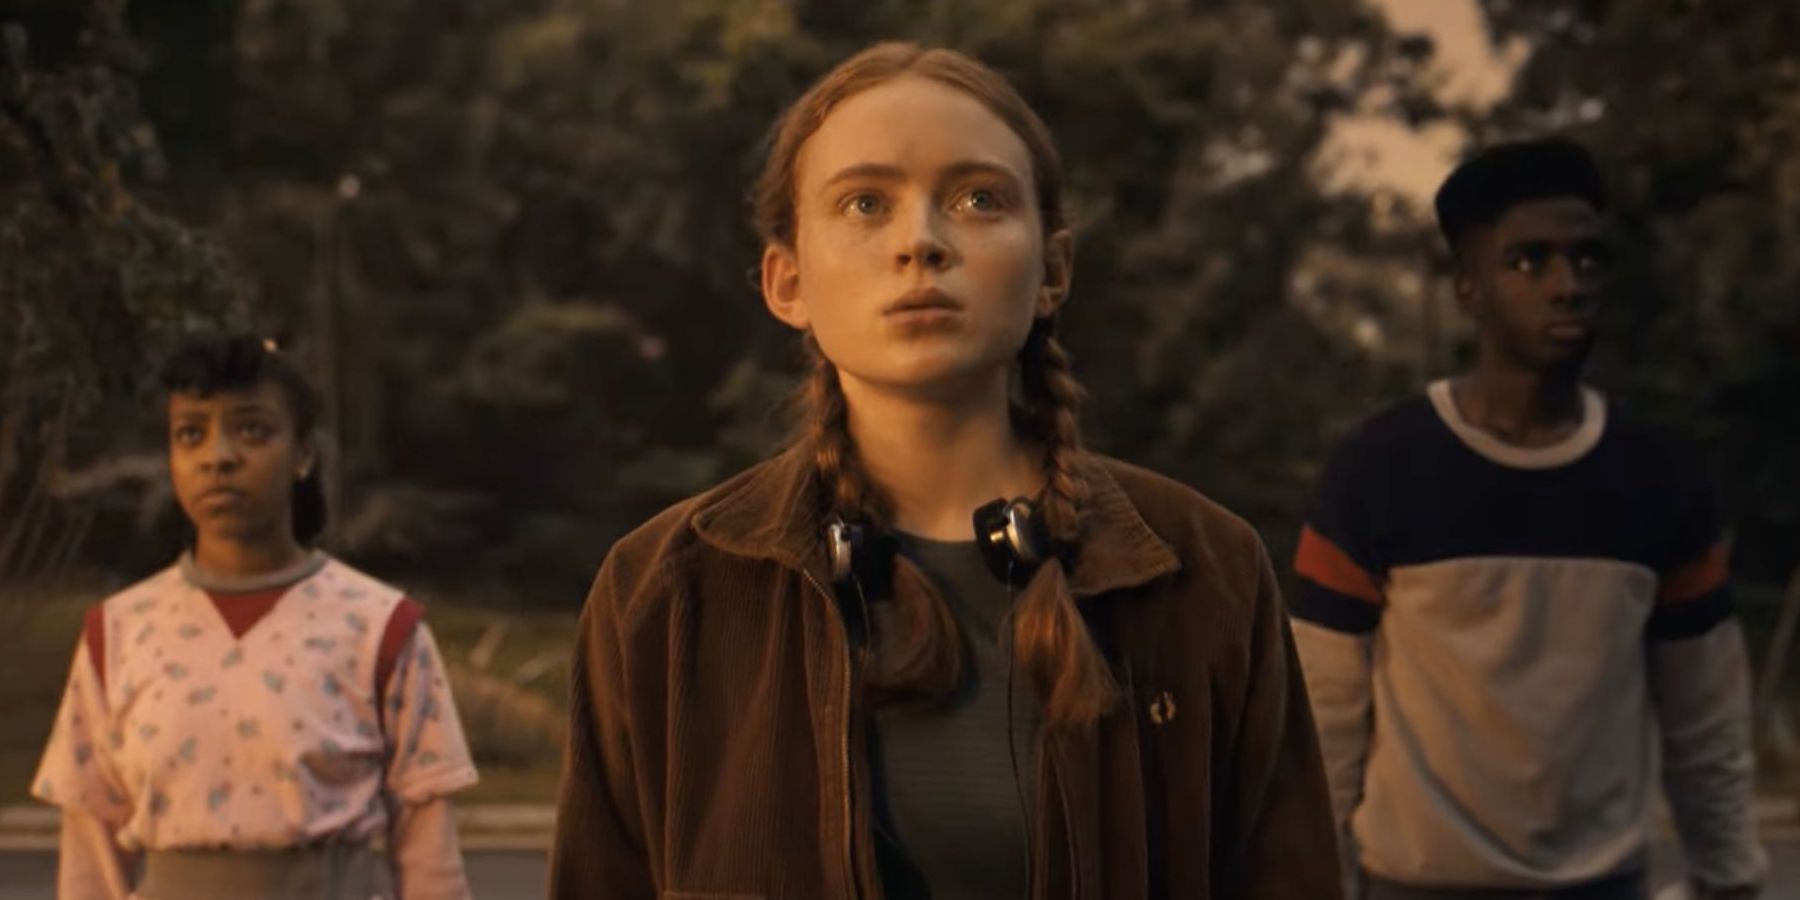 Stranger Things Sadie Sink Doesn't Know Max's Fate